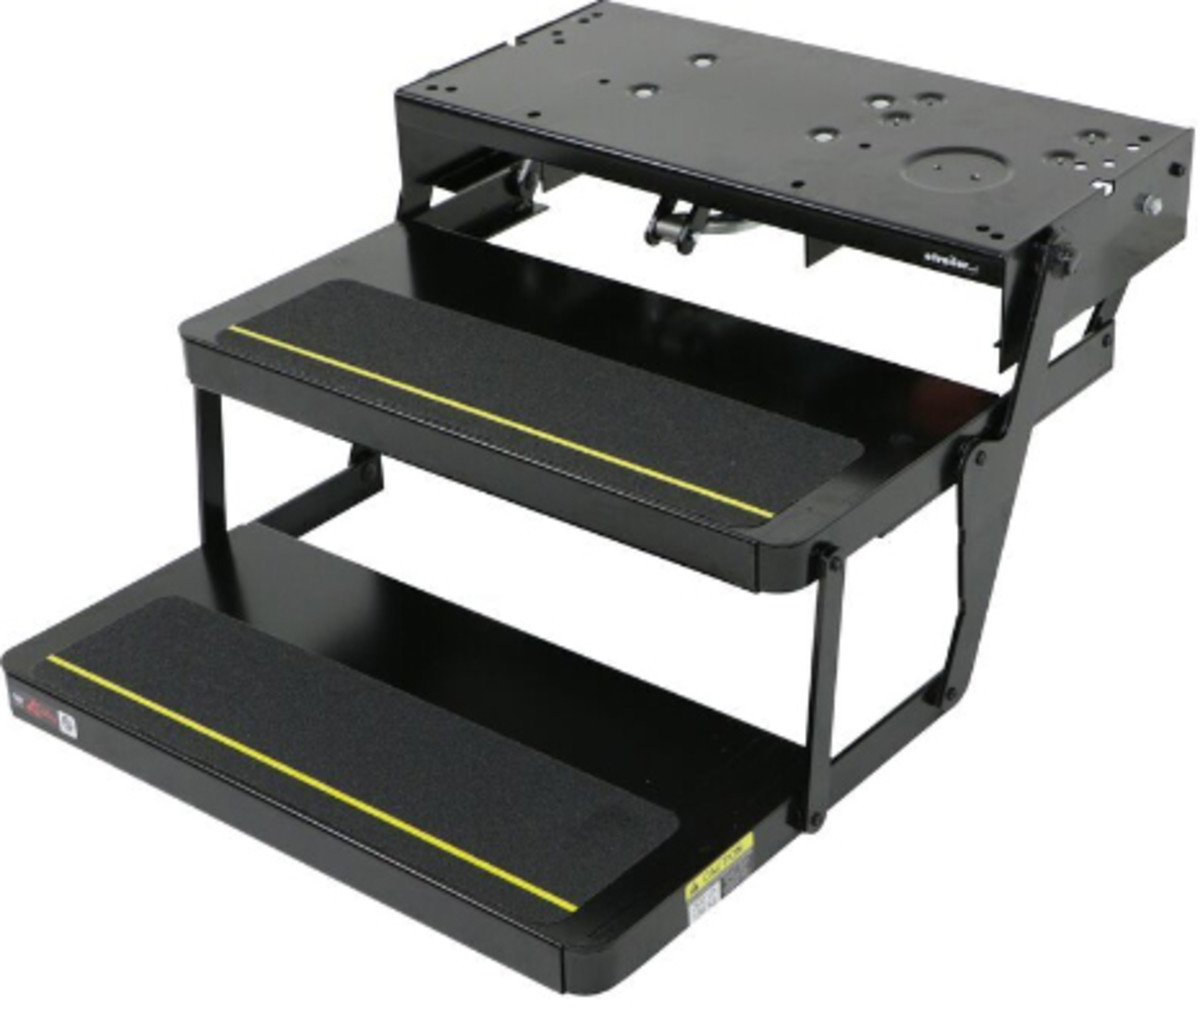 A standard 2-step powered entrance step assembly for an RV